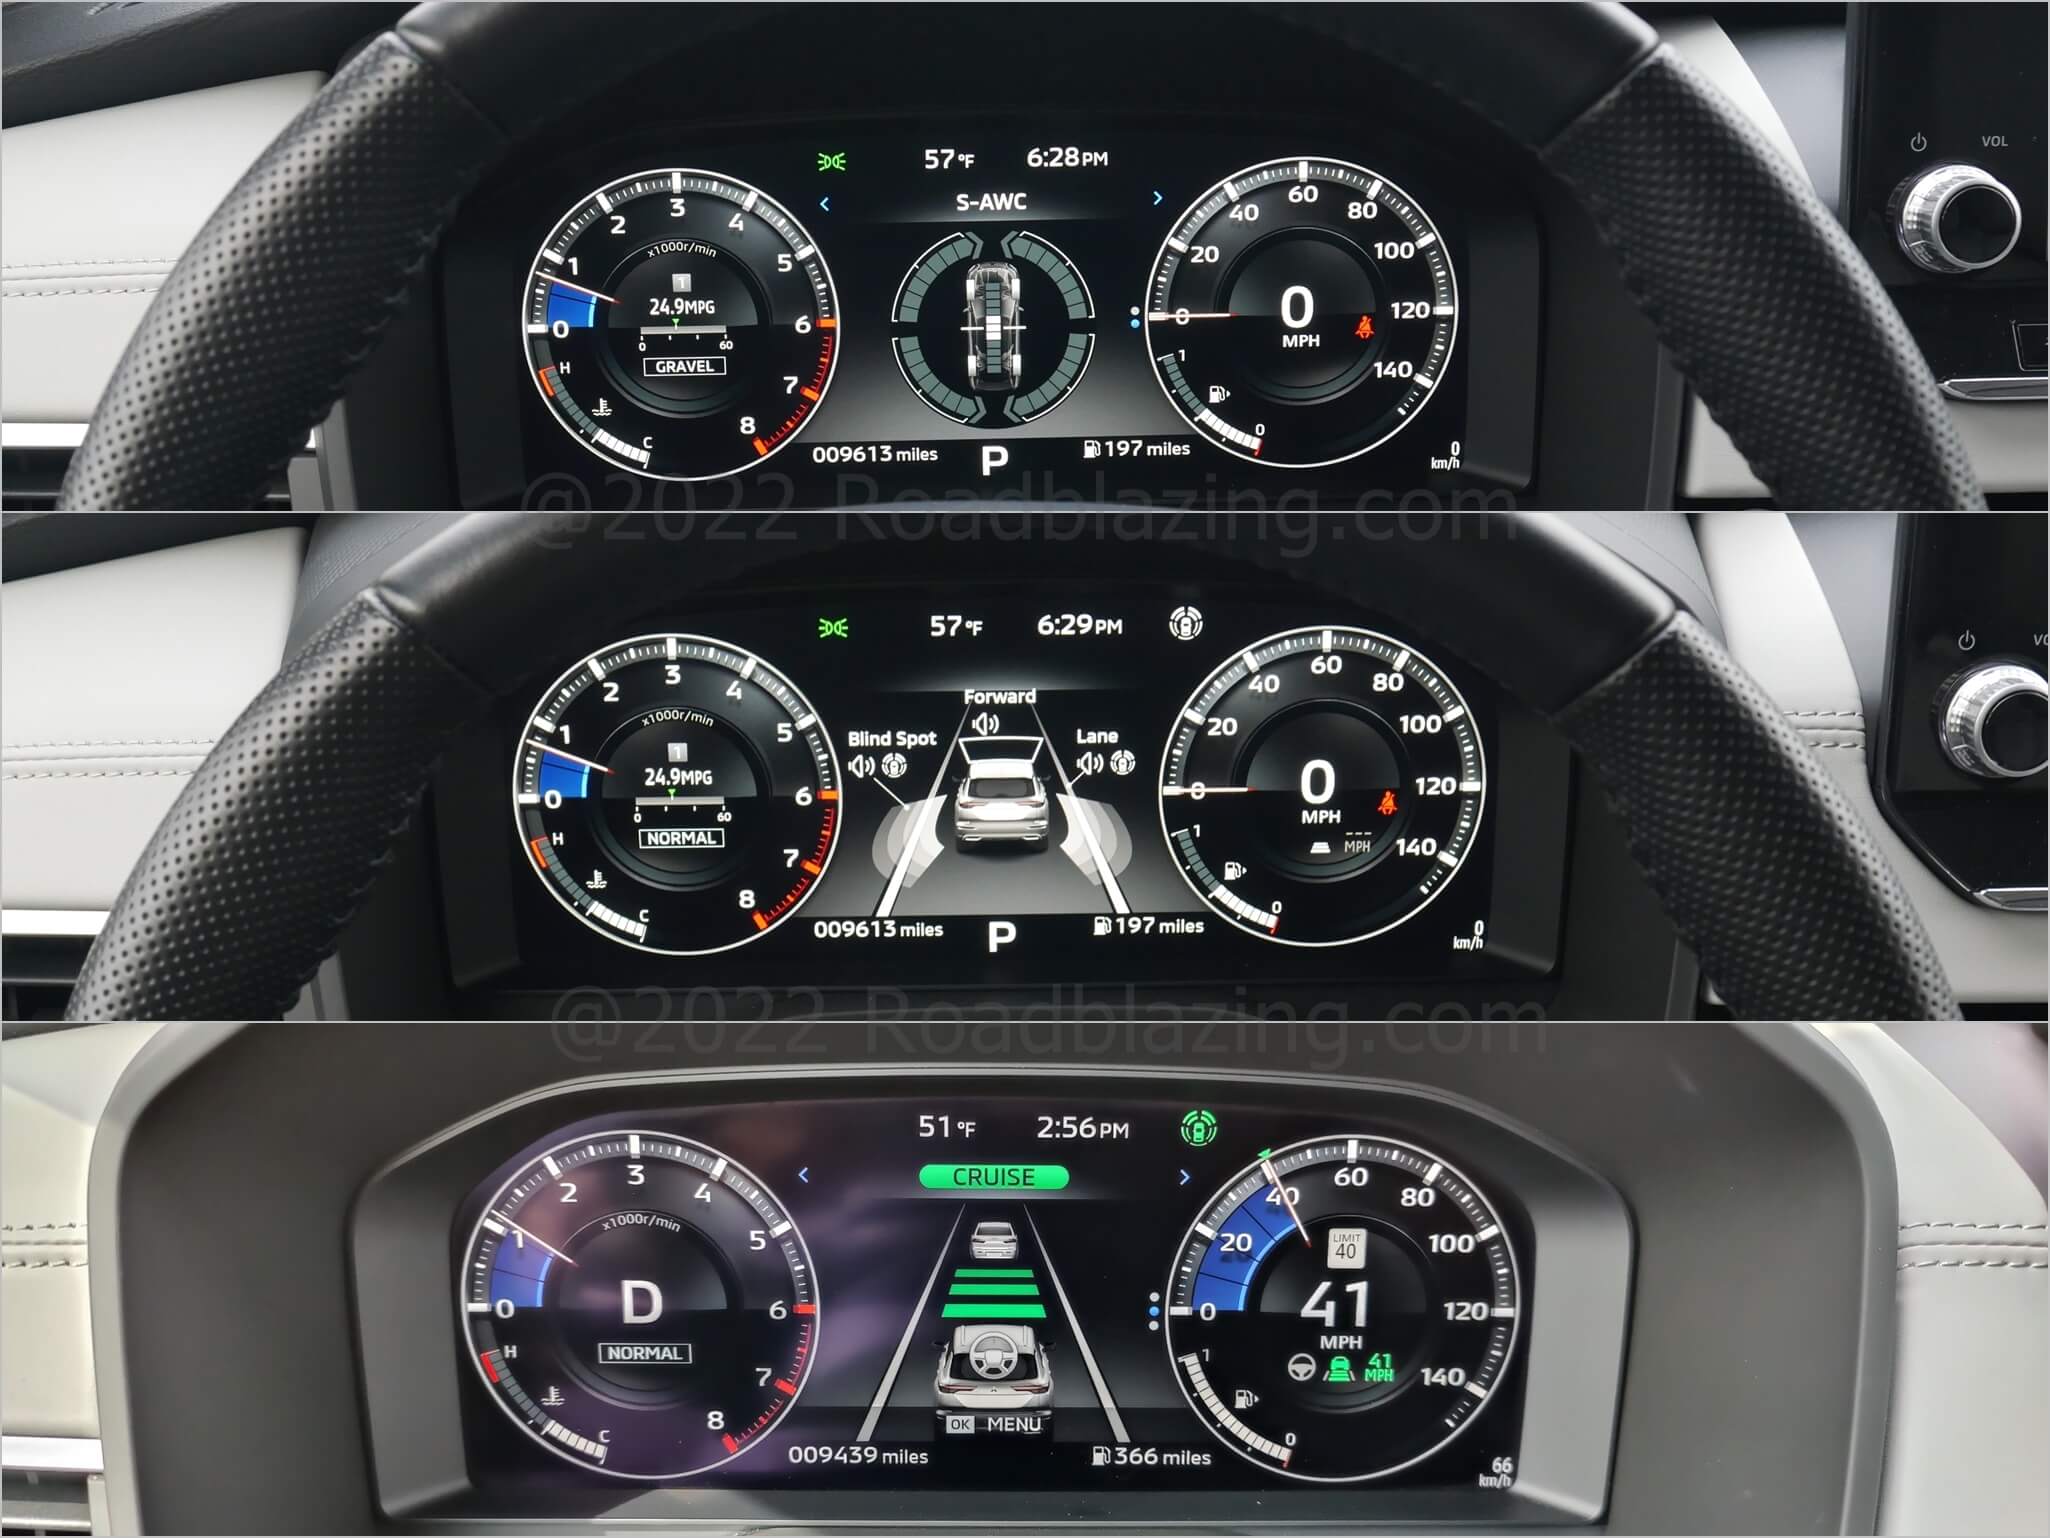 2022 Mitsubishi Outlander 2.5L SEL AWC: vehicle and ADAS status displayed in available 12.3" digital gauge cluster